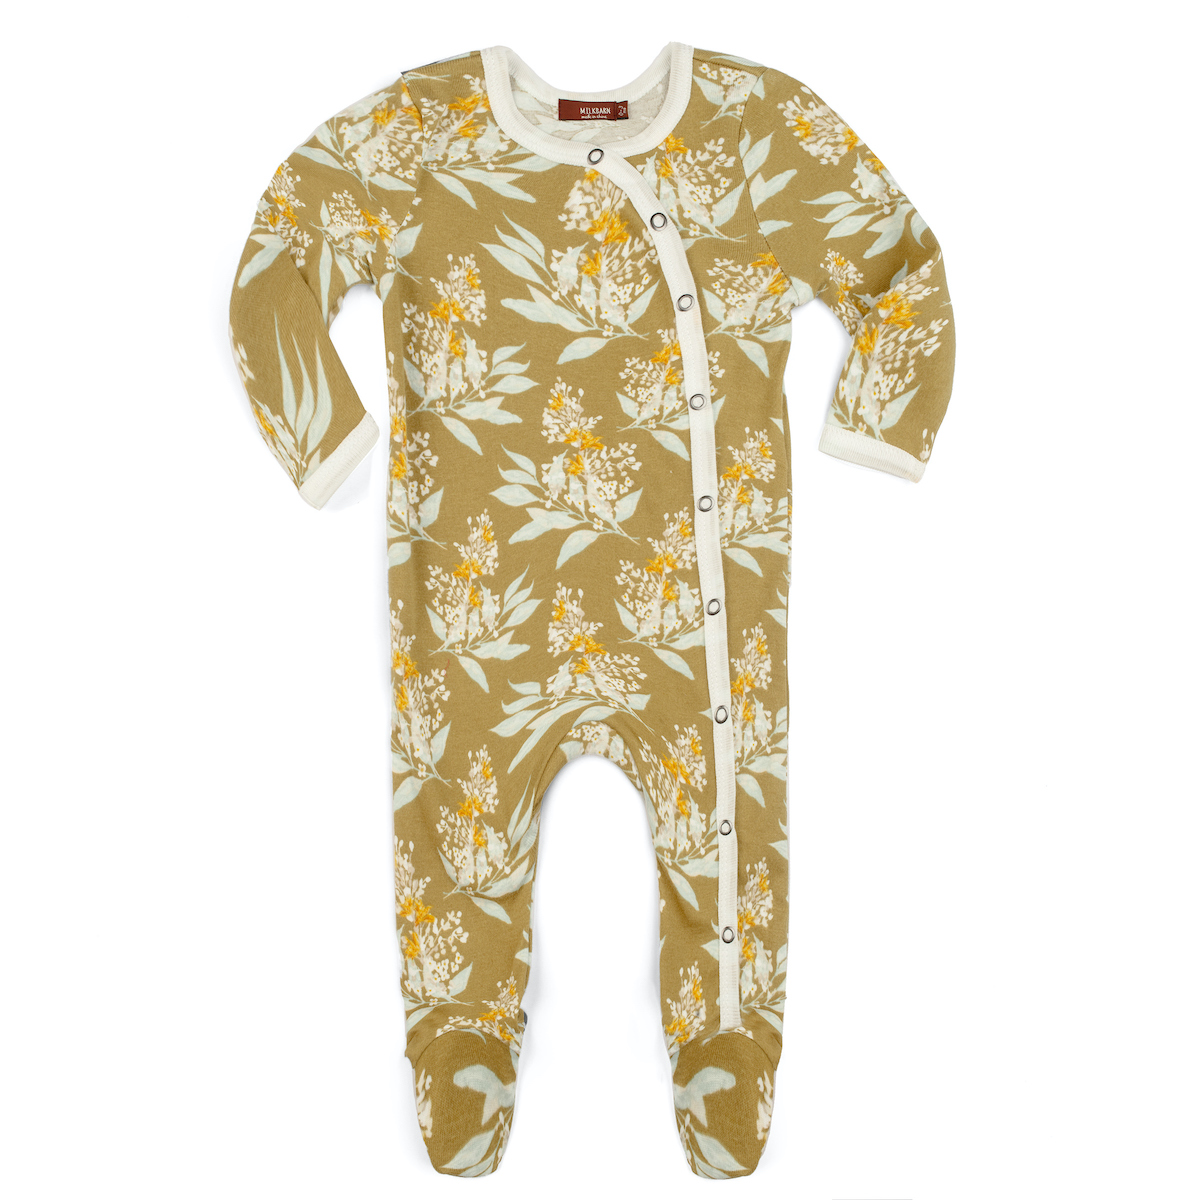 37139 - Gold Floral Organic Cotton Snap Footed Romper